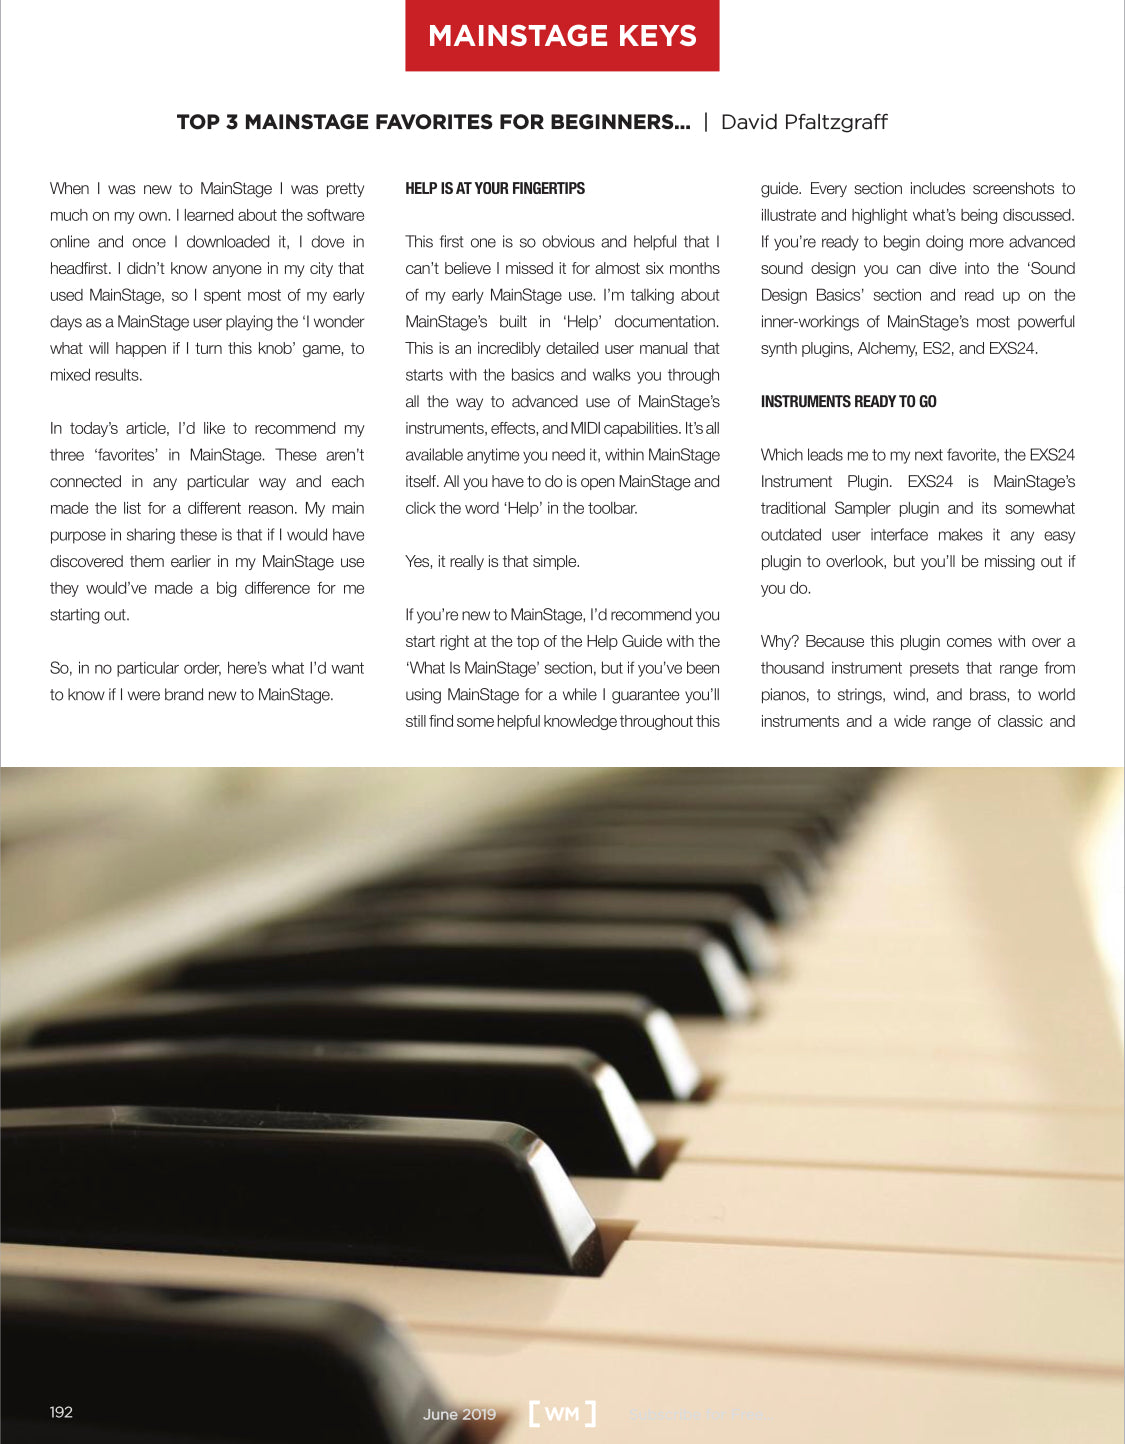 Top 3 MainStage Favorites for Beginners: Worship Musician Mag June 2019!